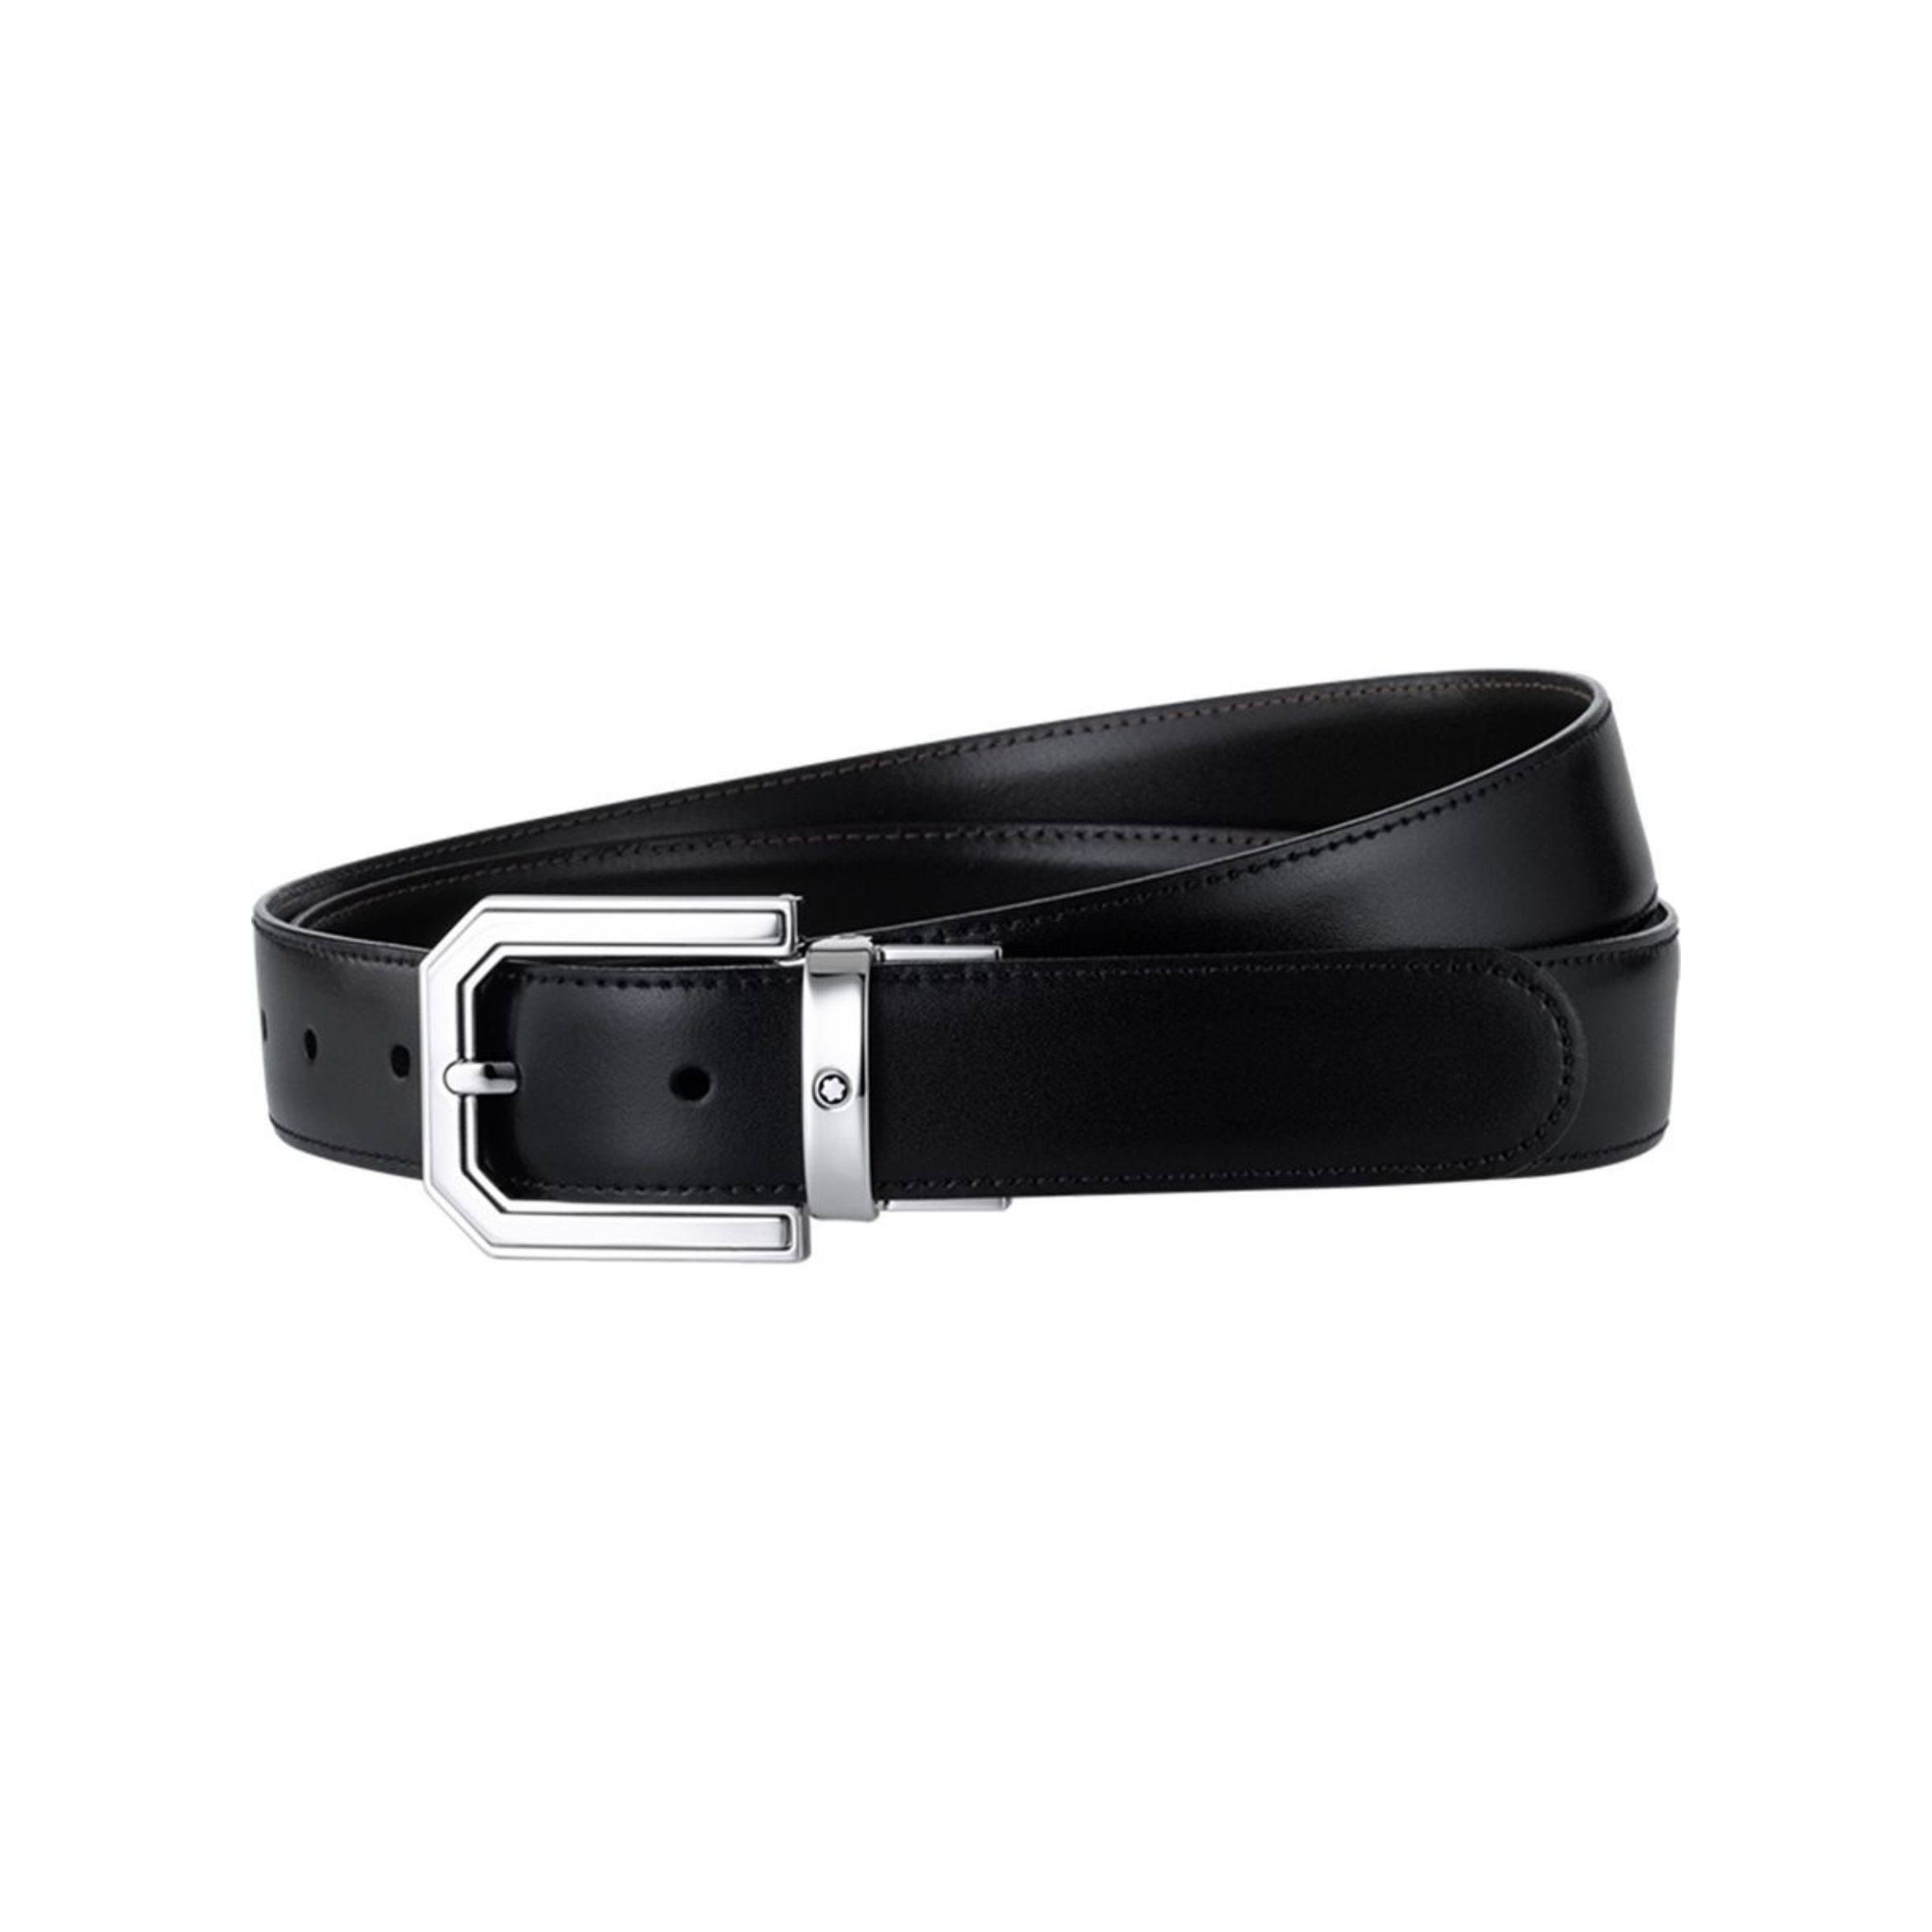 Purchase Montblanc Belt With 120*3 Cm Strap Dimension